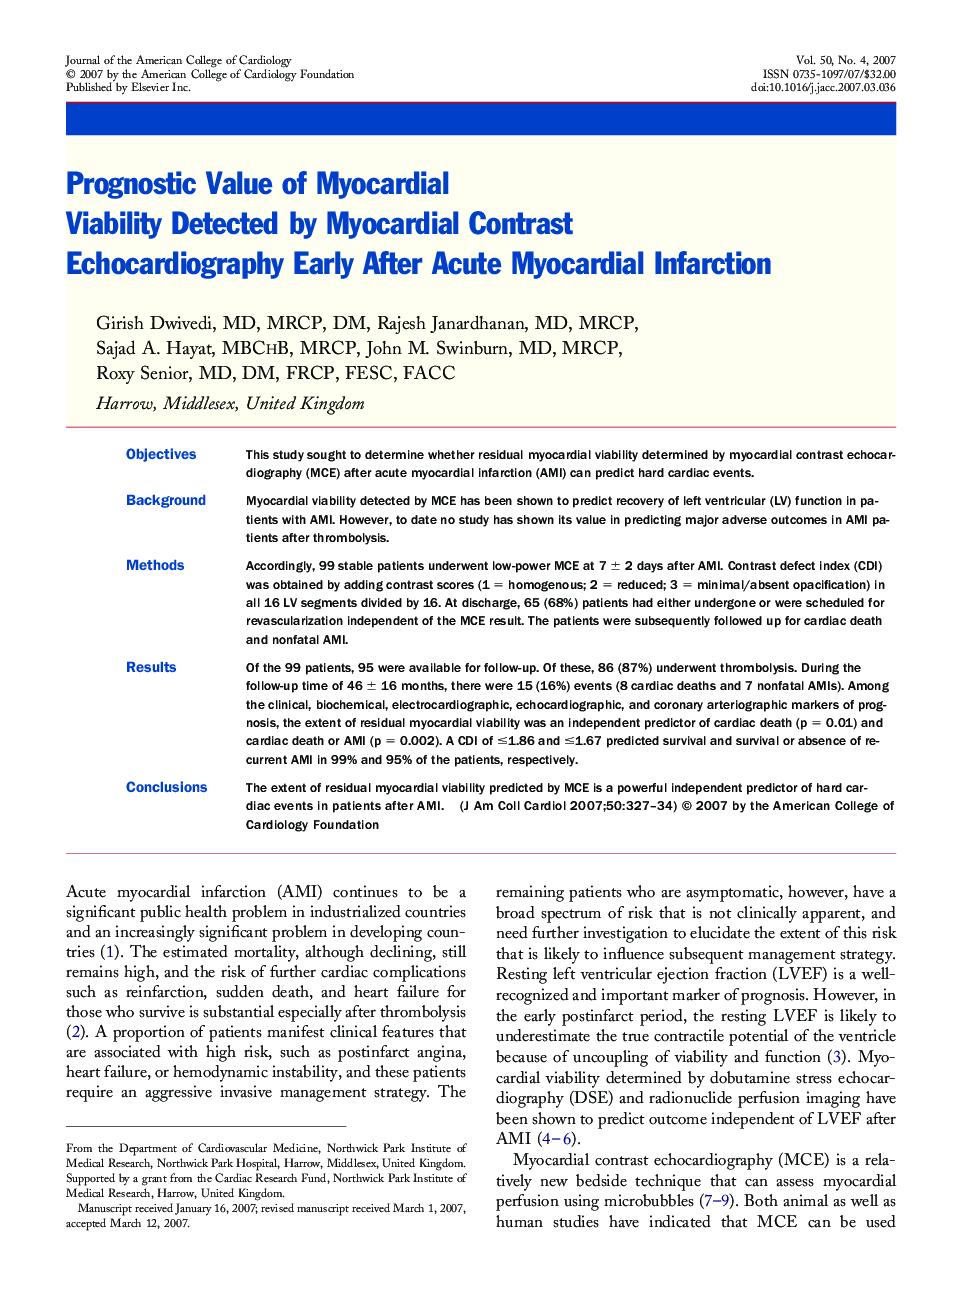 Prognostic Value of Myocardial Viability Detected by Myocardial Contrast Echocardiography Early After Acute Myocardial Infarction 